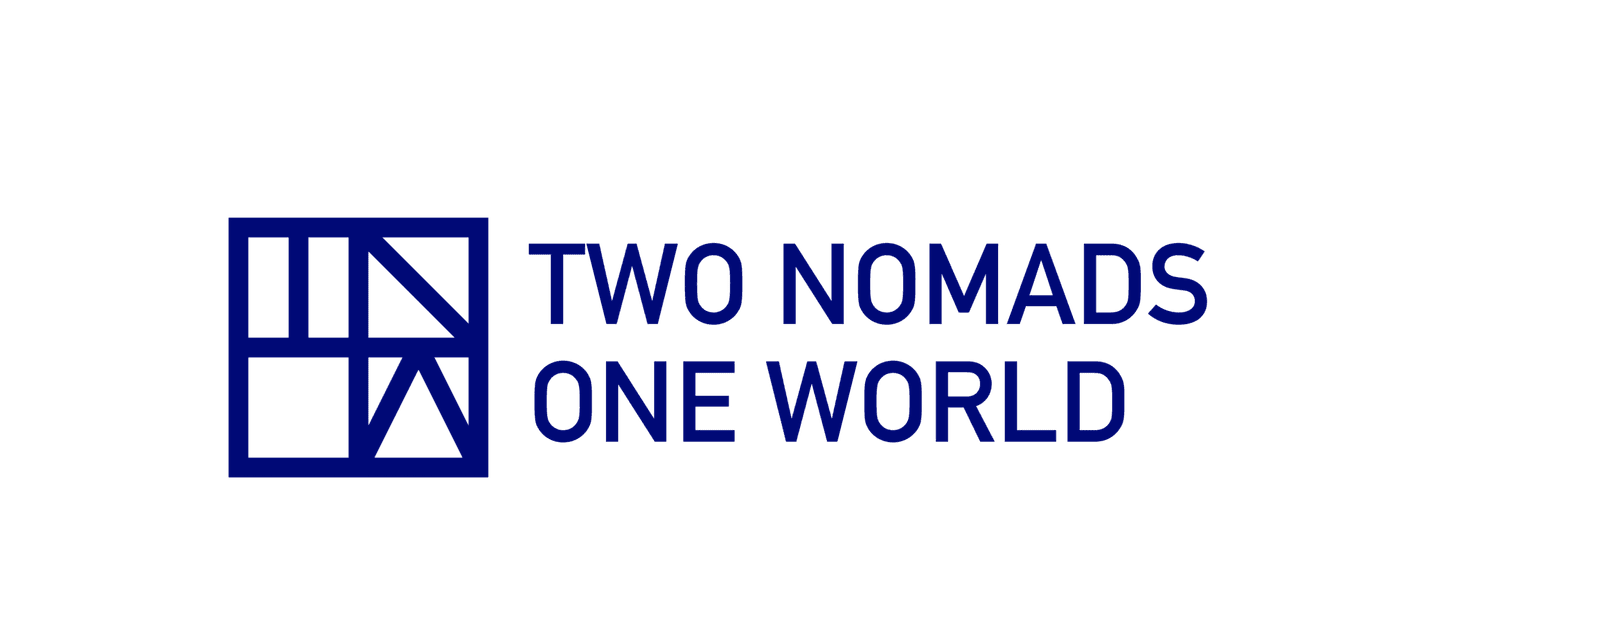 Two Nomads One World | Discover Travel Groups For Couples | 2N1W